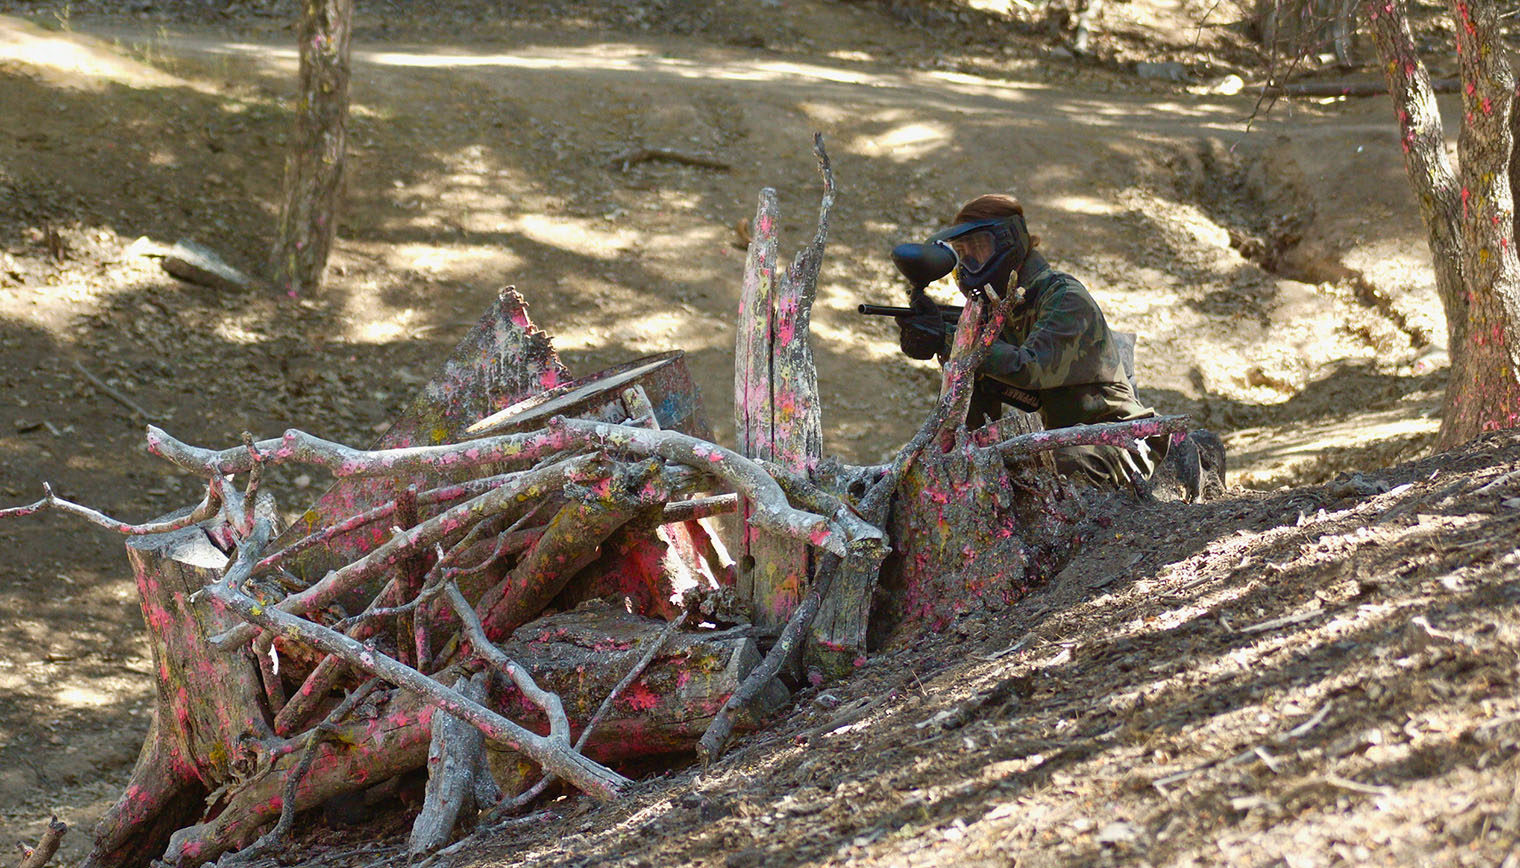 A person crouched behind a pile of branches in the middle of a paintball game.